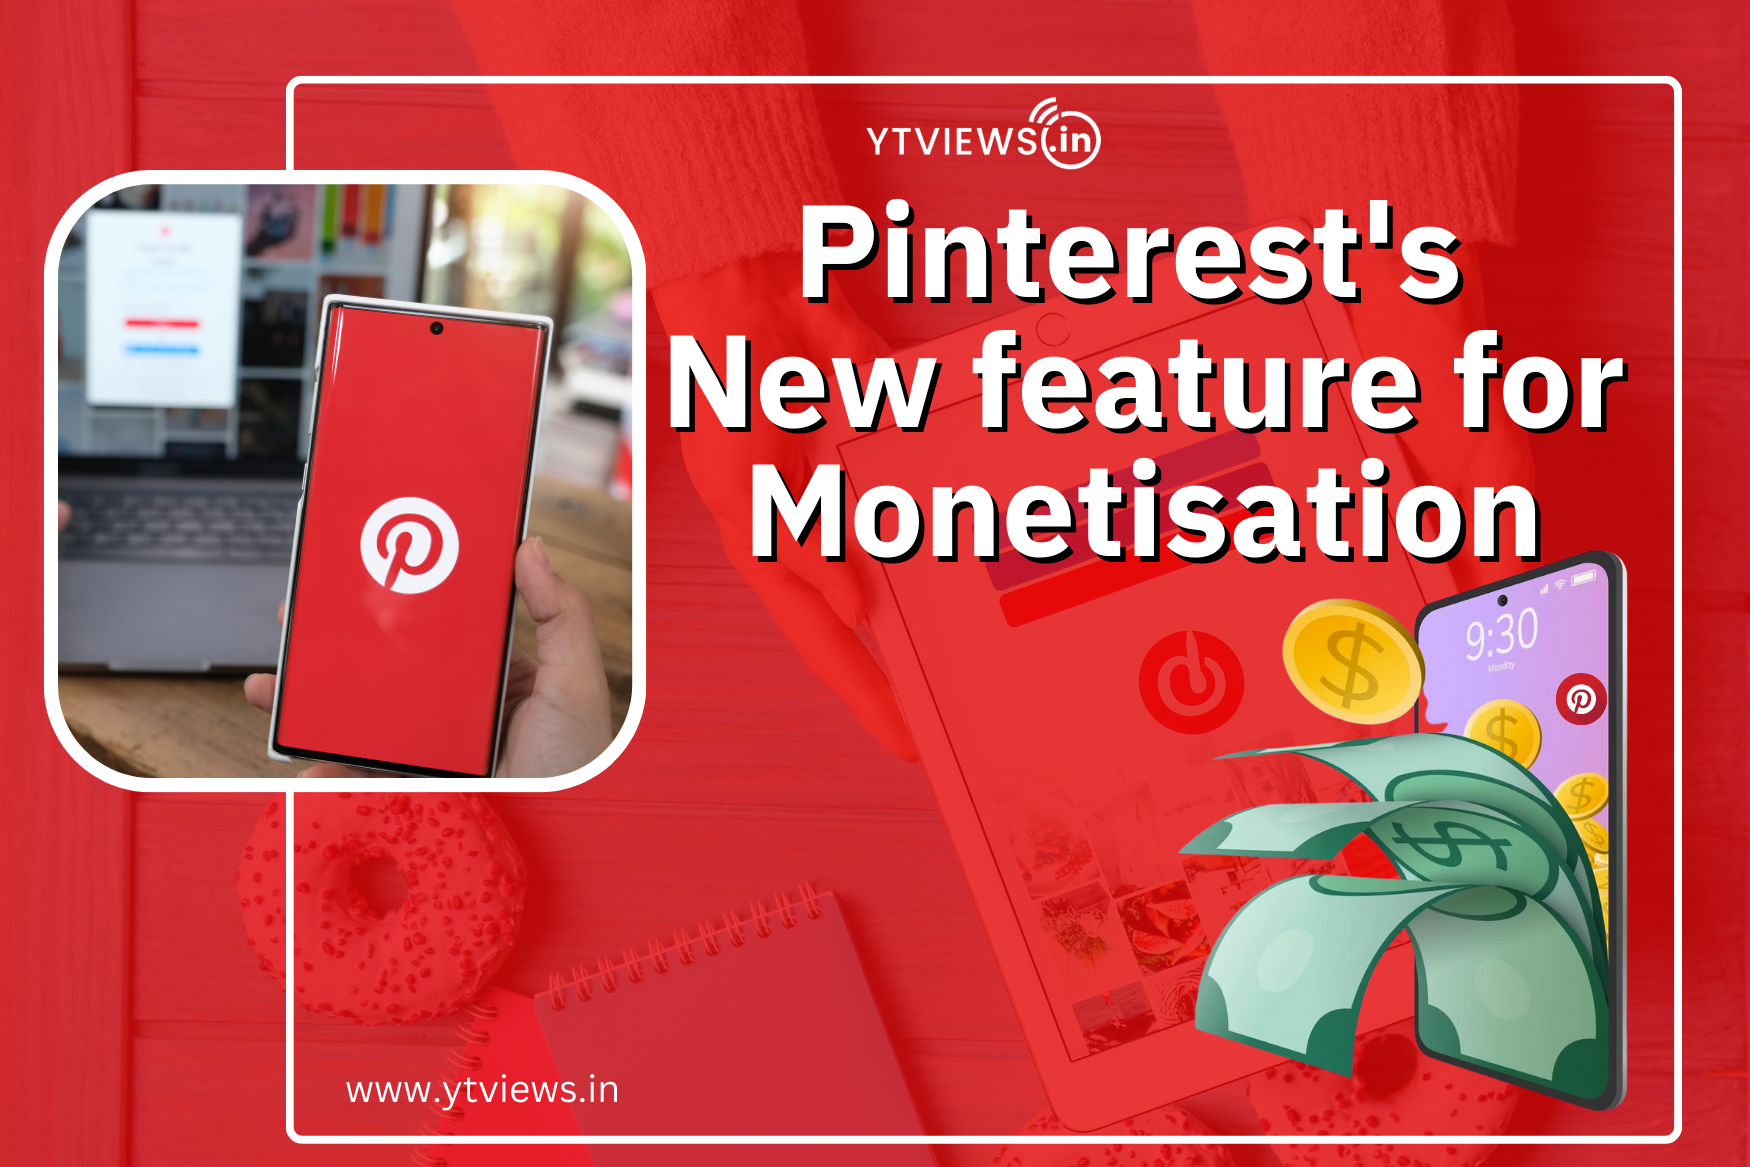 Pinterest’s new “shoppable content” feature for monetization